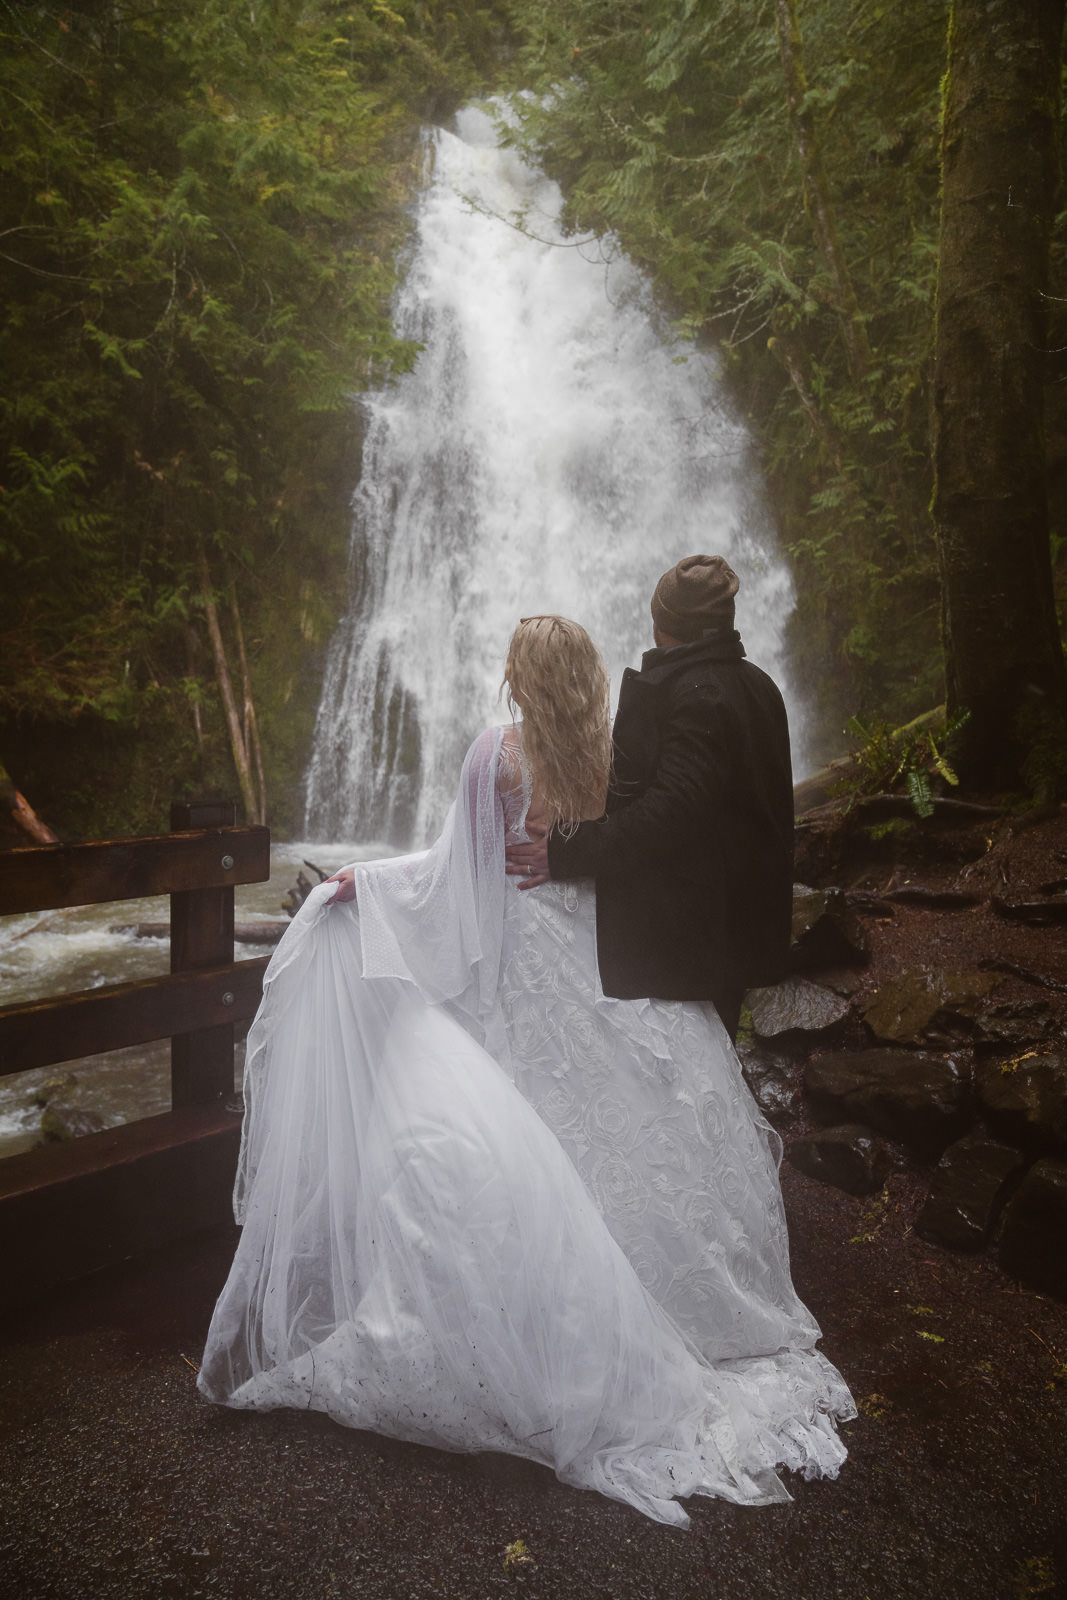 Couple elopes at Madison Falls in Olympic National Park during rain storm